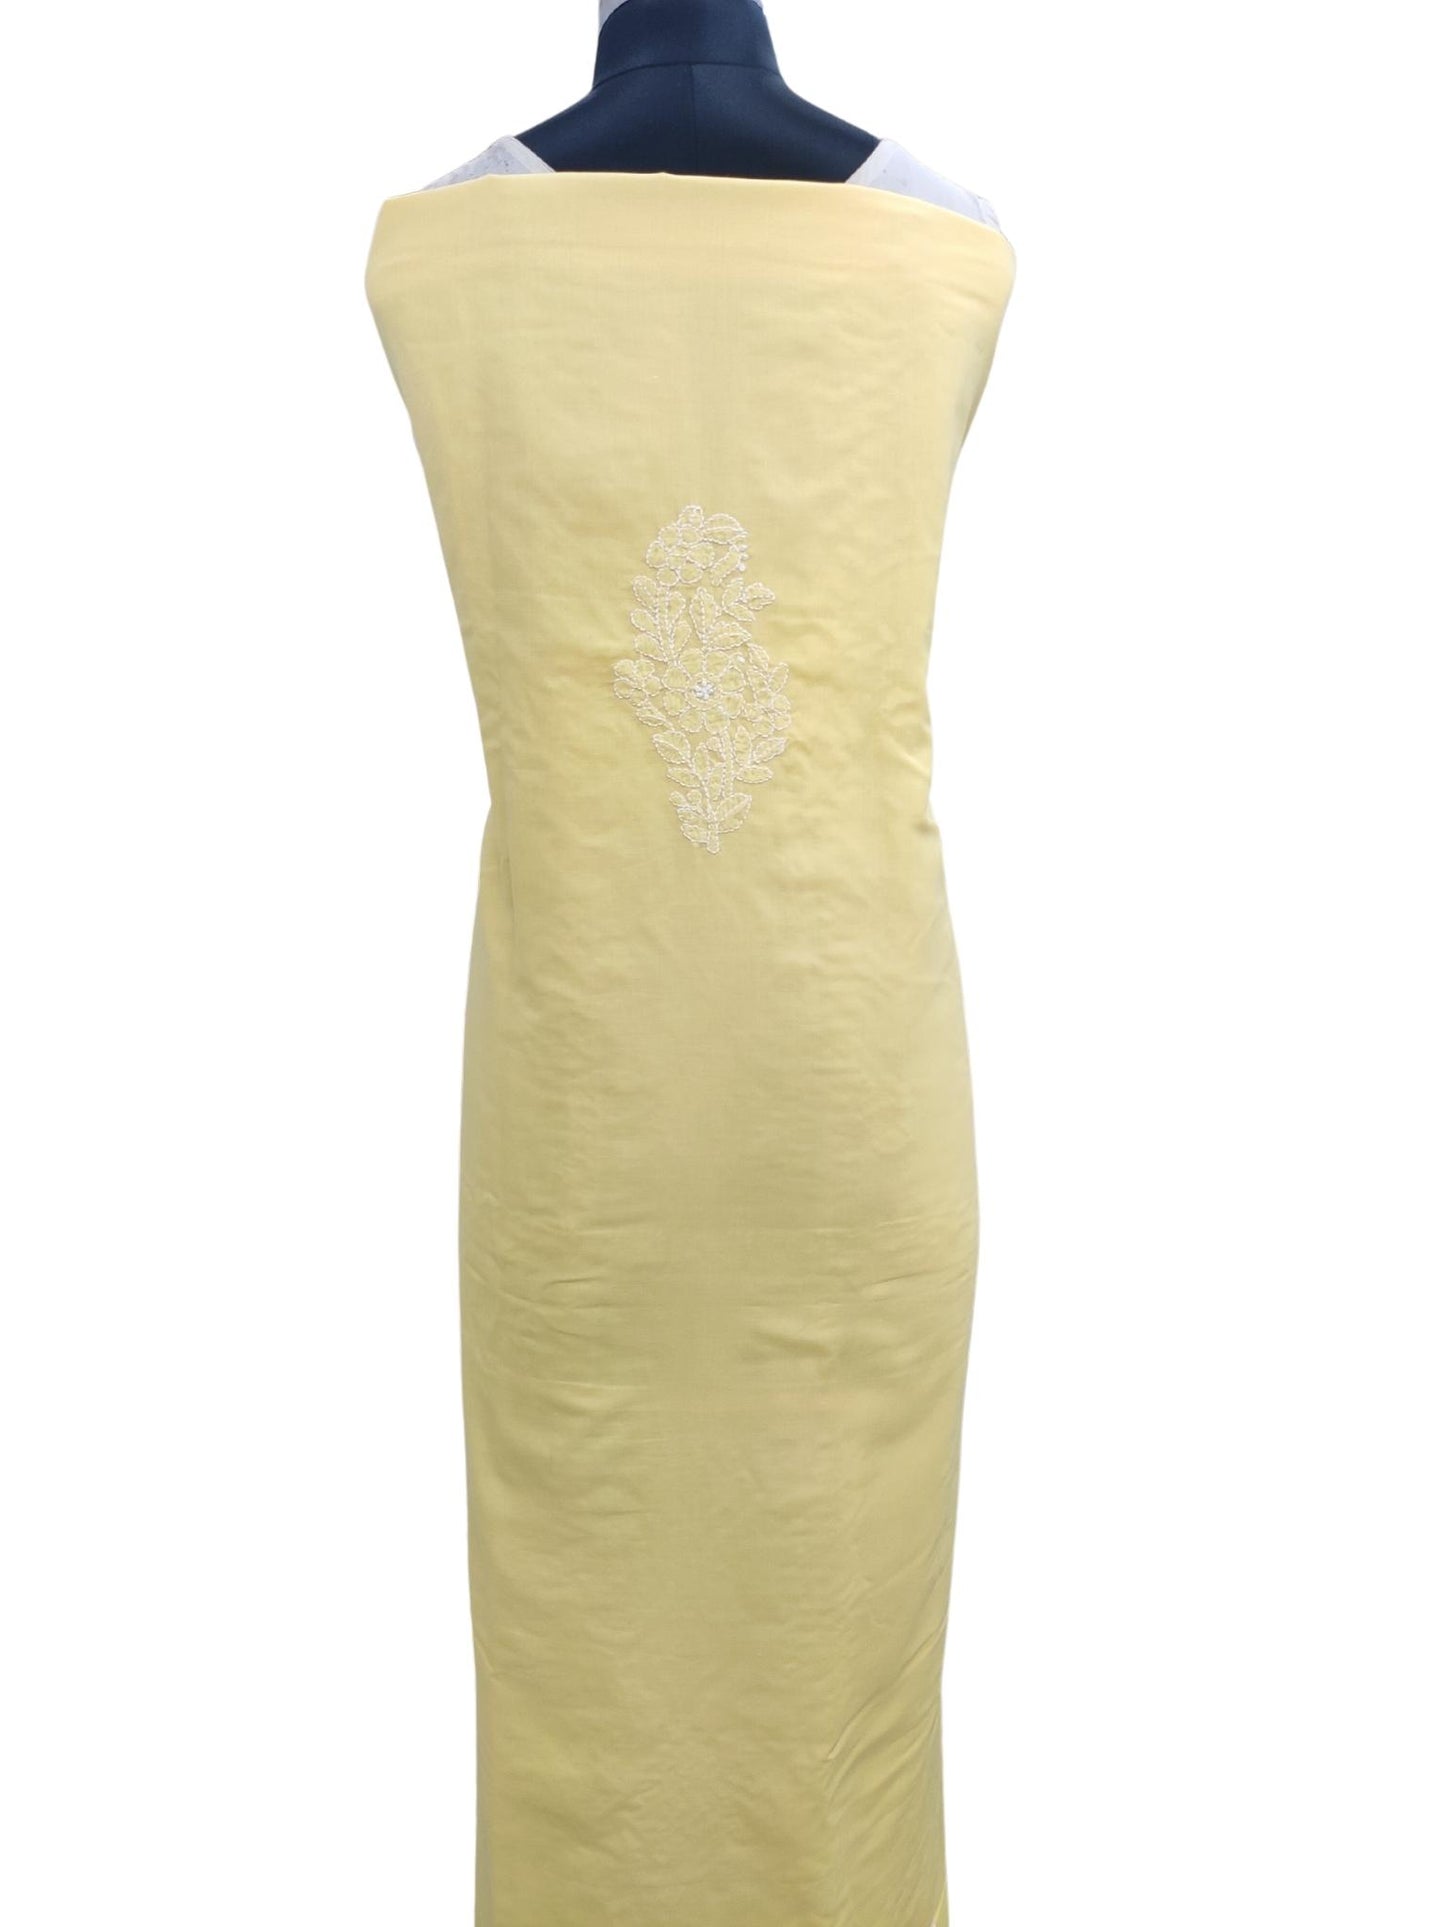 Shyamal Chikan Hand Embroidered Yellow Cotton Lucknowi Chikankari Unstitched Suit Piece With Jaali Work - S19276